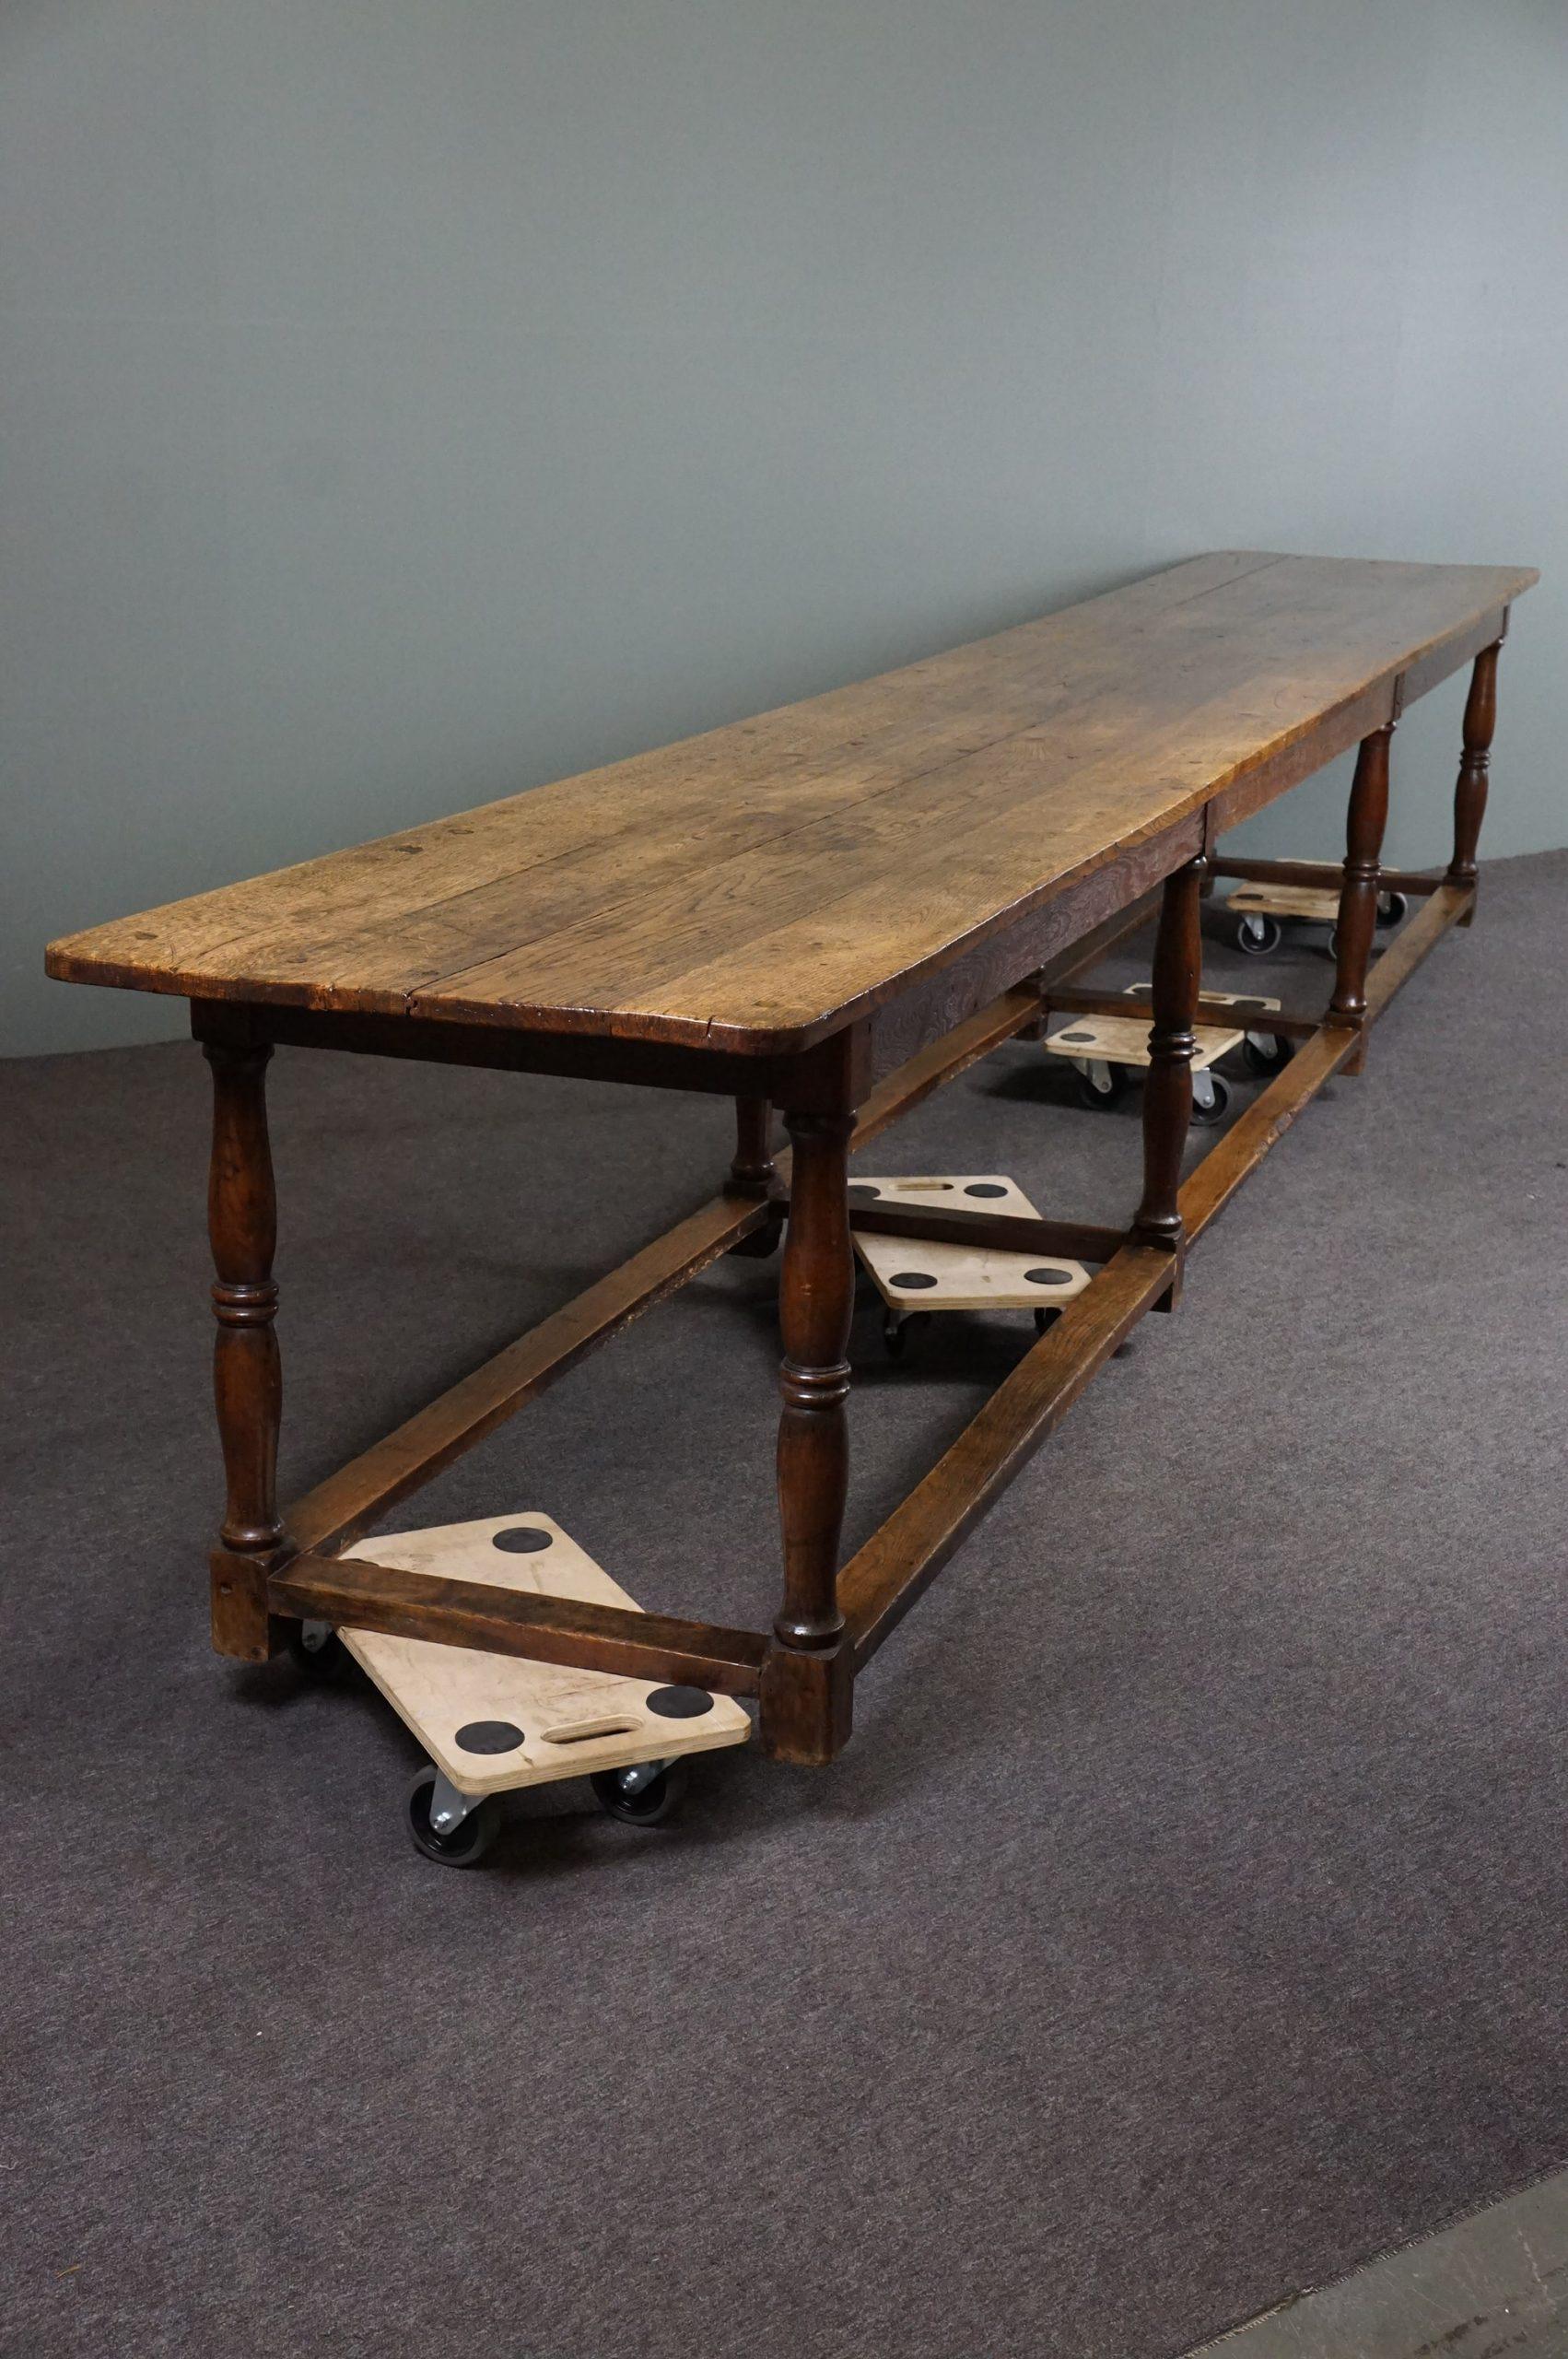 Offered this very spacious antique English oak dining table, 
full with details and therefore an asset for the true enthusiast!

This very large English antique dining table of no less than 5 meters long, full of allure, dates from around 1840/1850